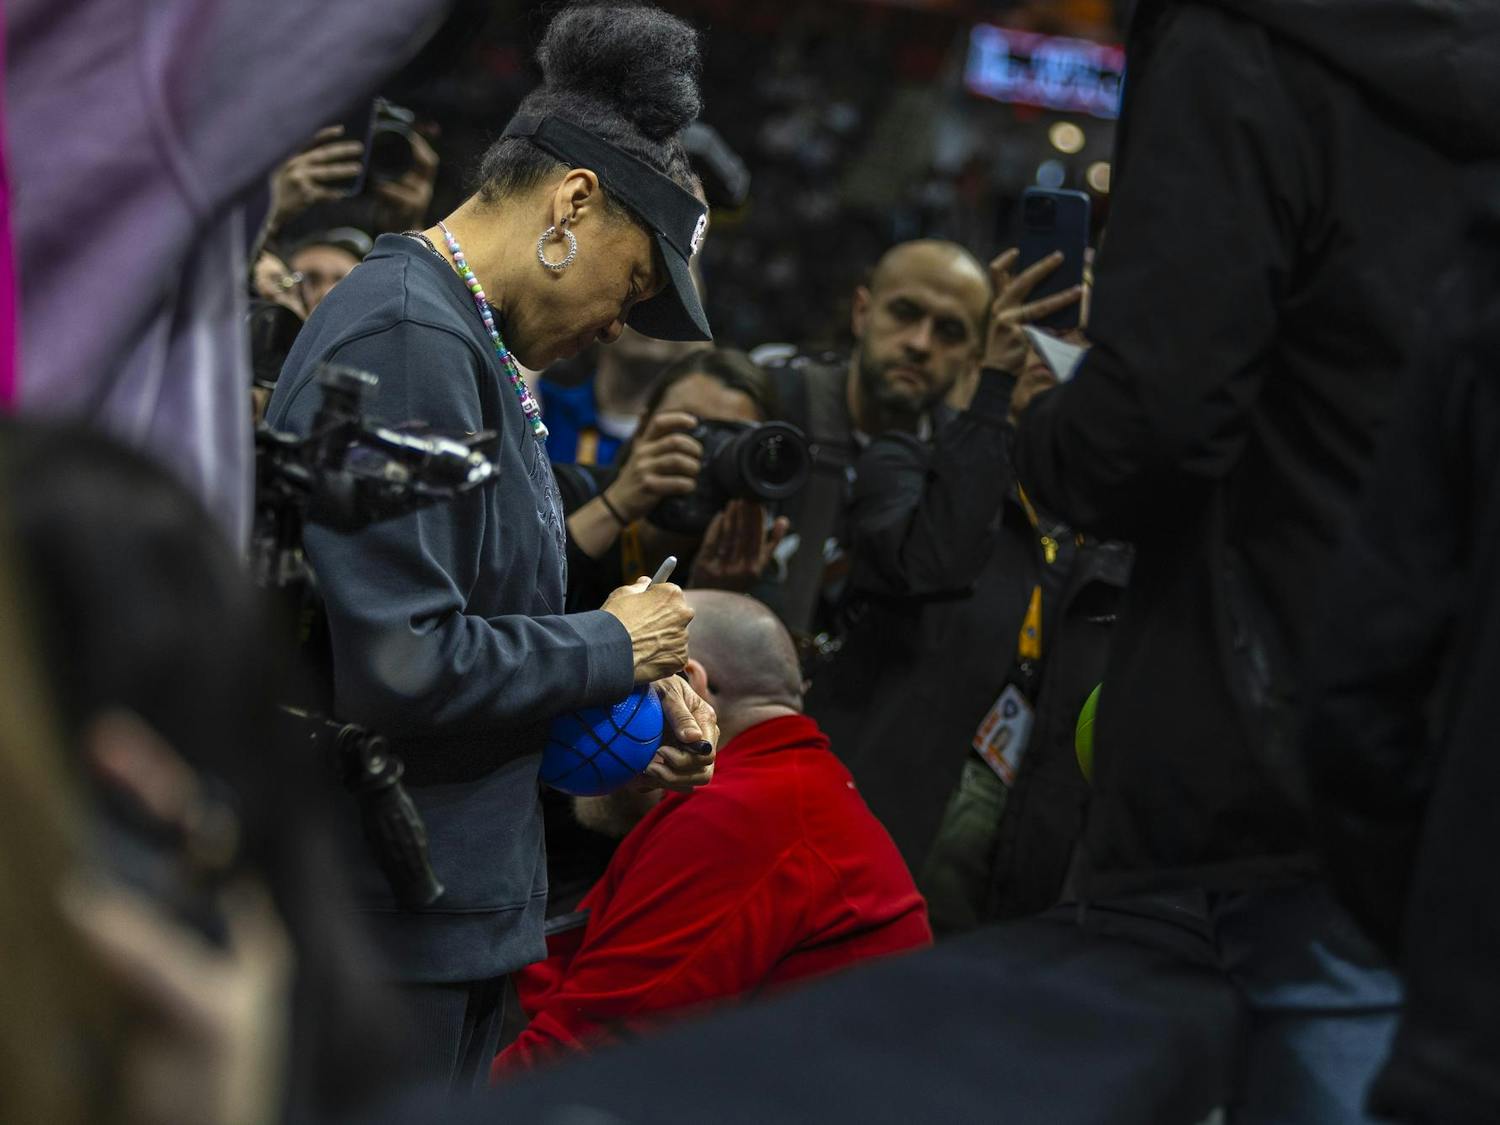 Gamecock women’s basketball head coach Dawn Staley signs a fan's basketball during open practice on April 6, 2024. Staley spent part of the practice greeting fans, signing items and taking selfies with members of the audience.